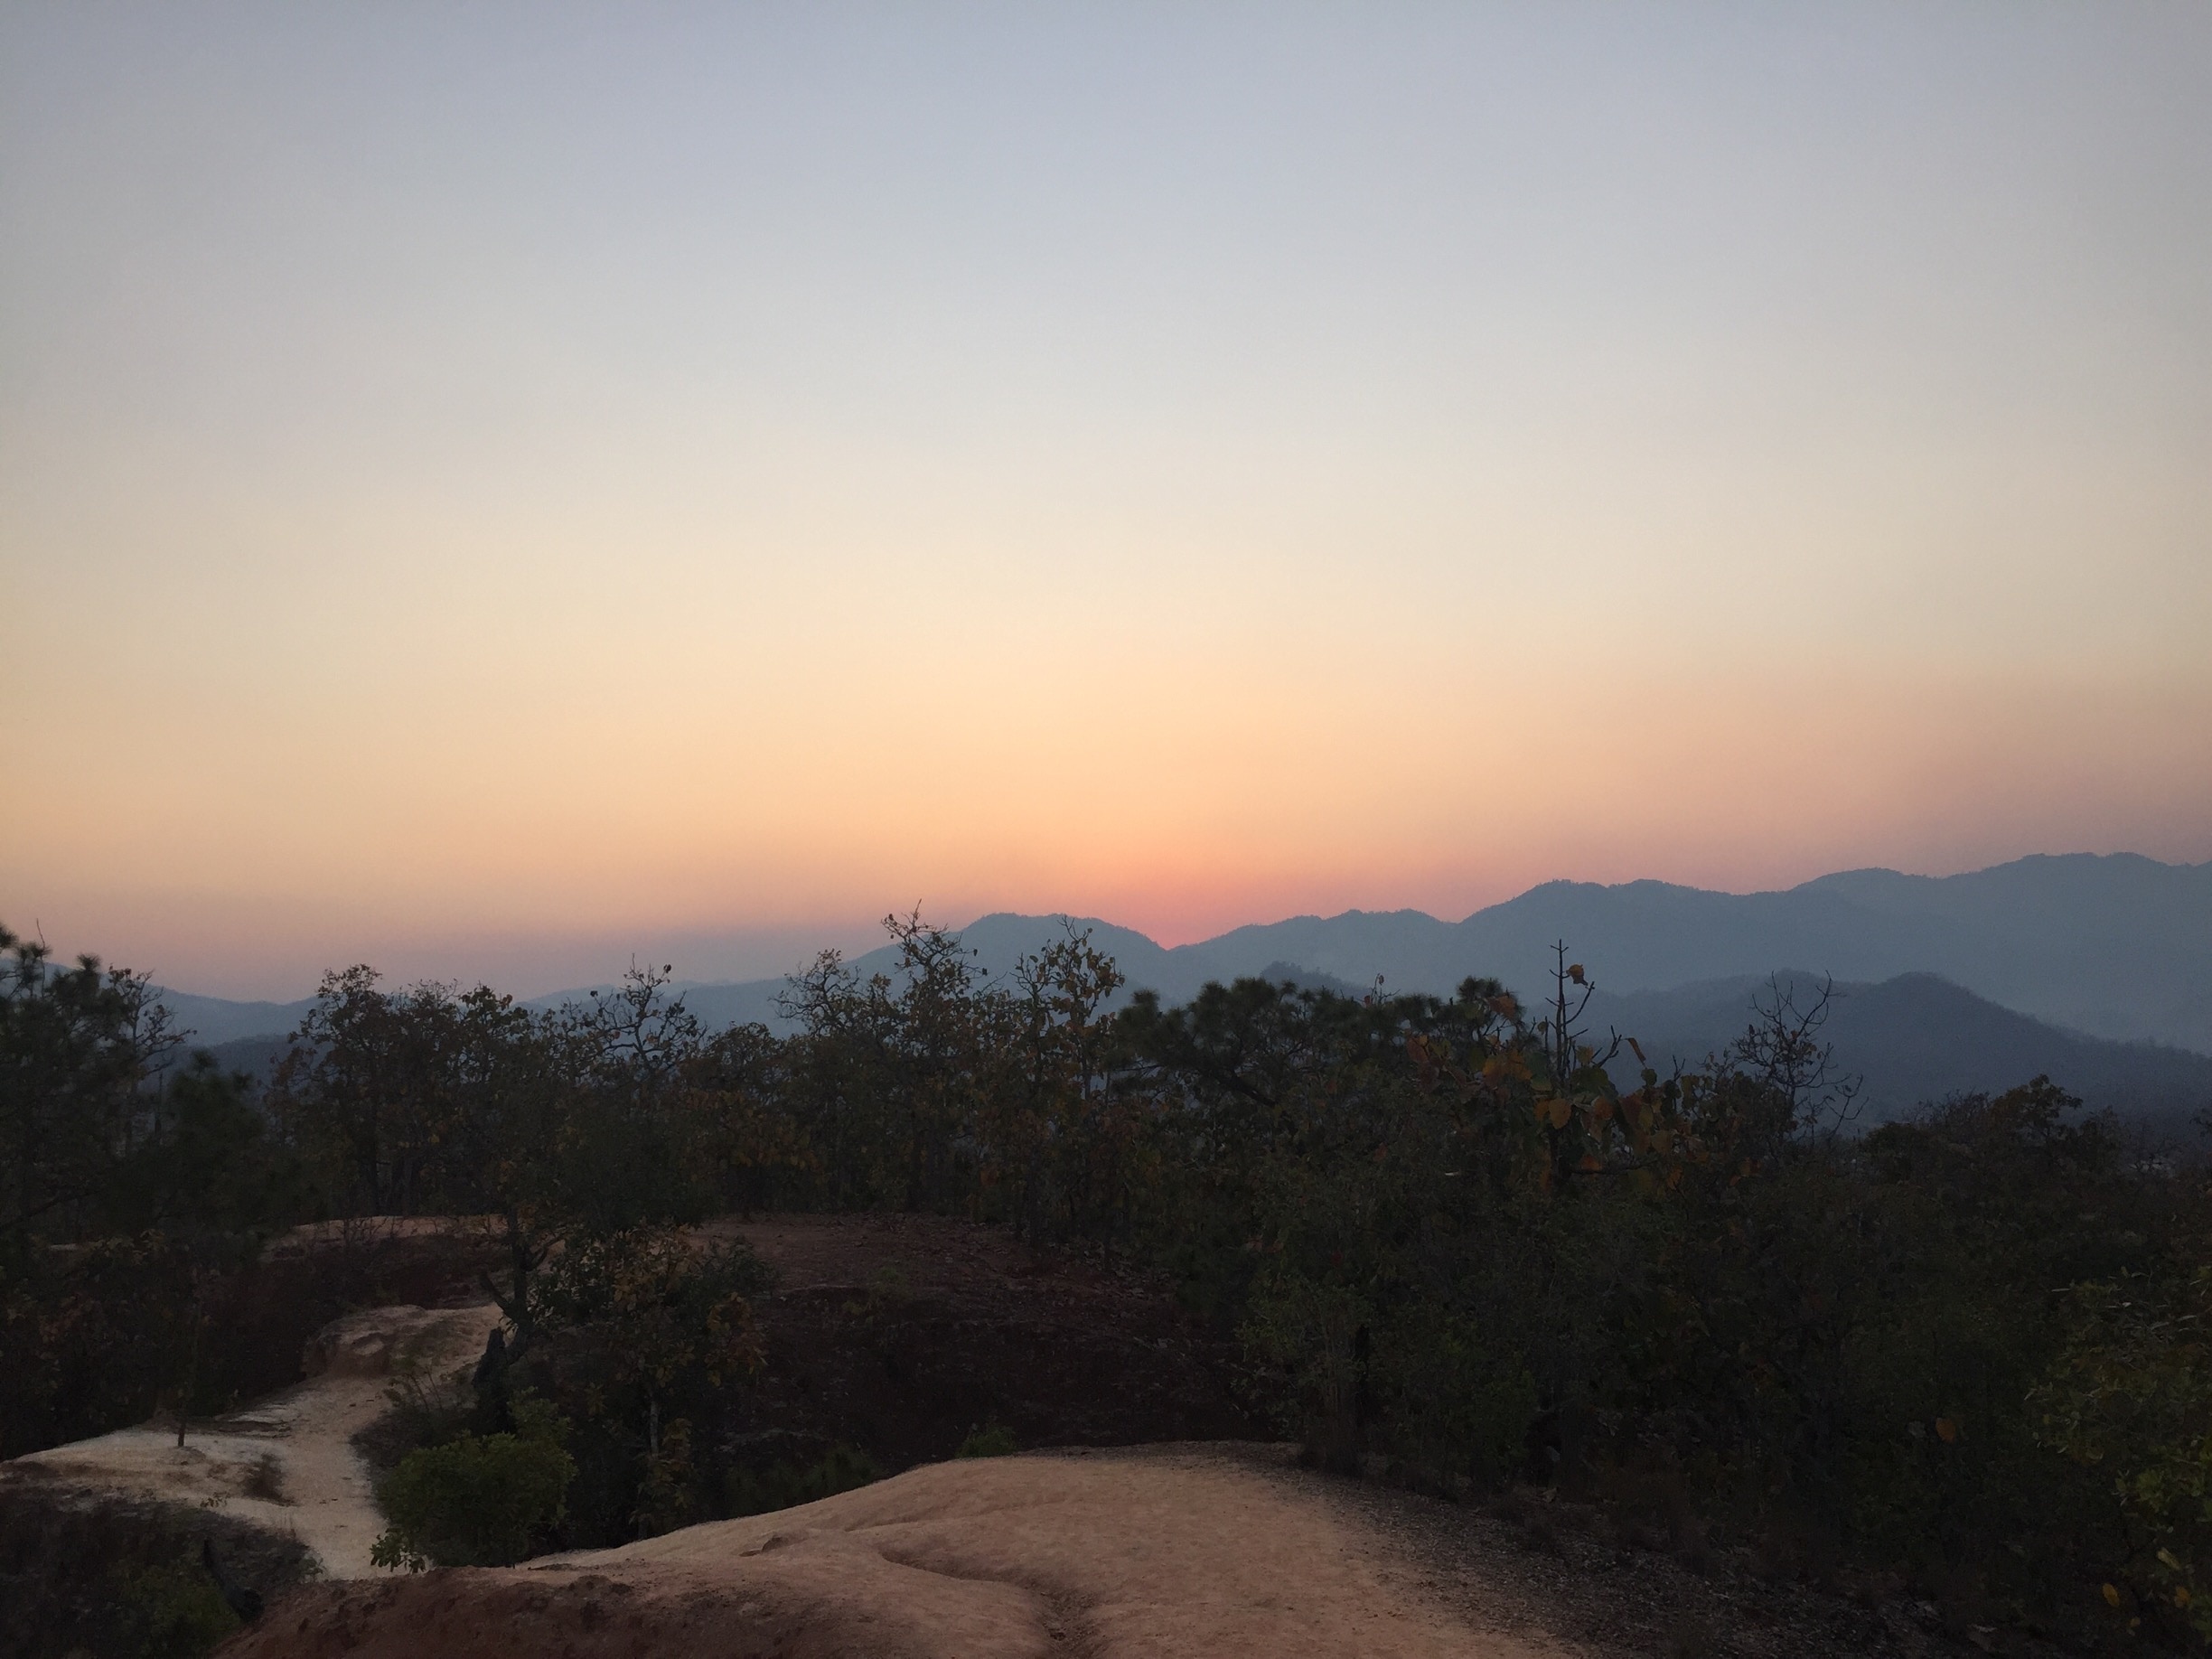 Take your motorbike and go to Pai Canyon for an amazing sunset. The canyon has wonderful hikes as well. 